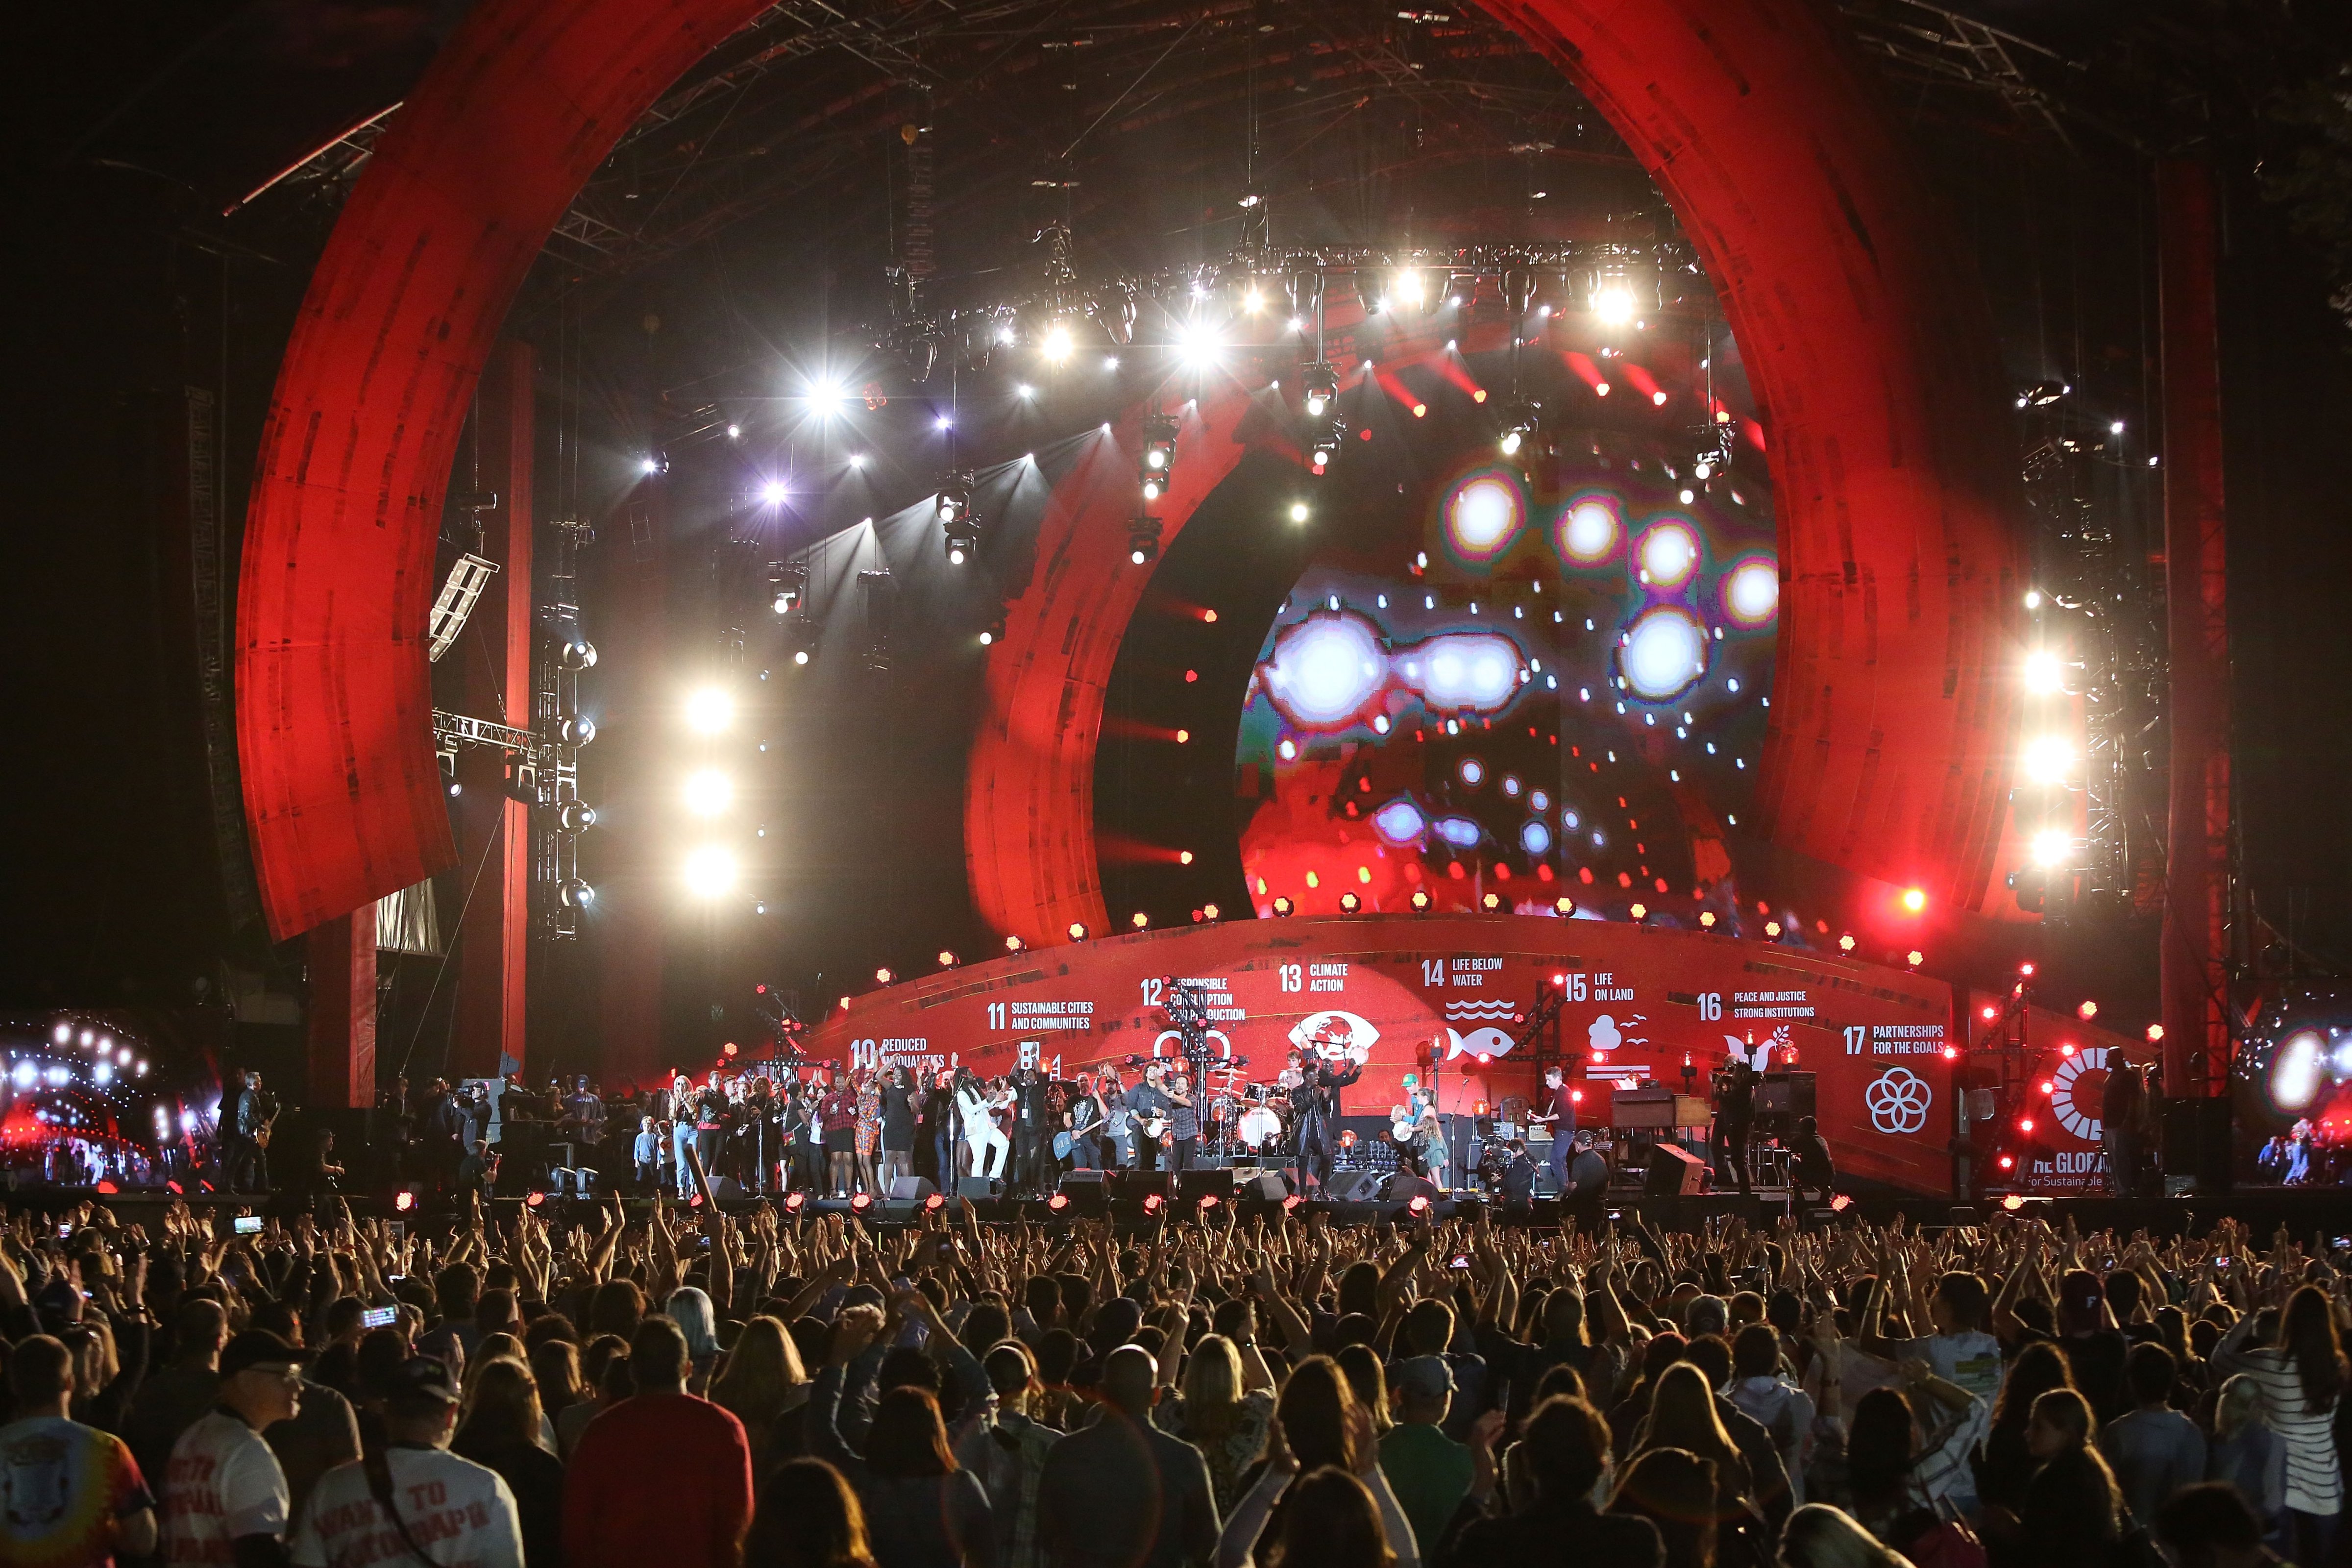 Pearl Jam performs "Rockin in the Free World" to close the 2015 Global Citizen Festival at Central Park on September 26, 2015 in New York City. (Taylor Hill&mdash;WireImage/Getty Images)